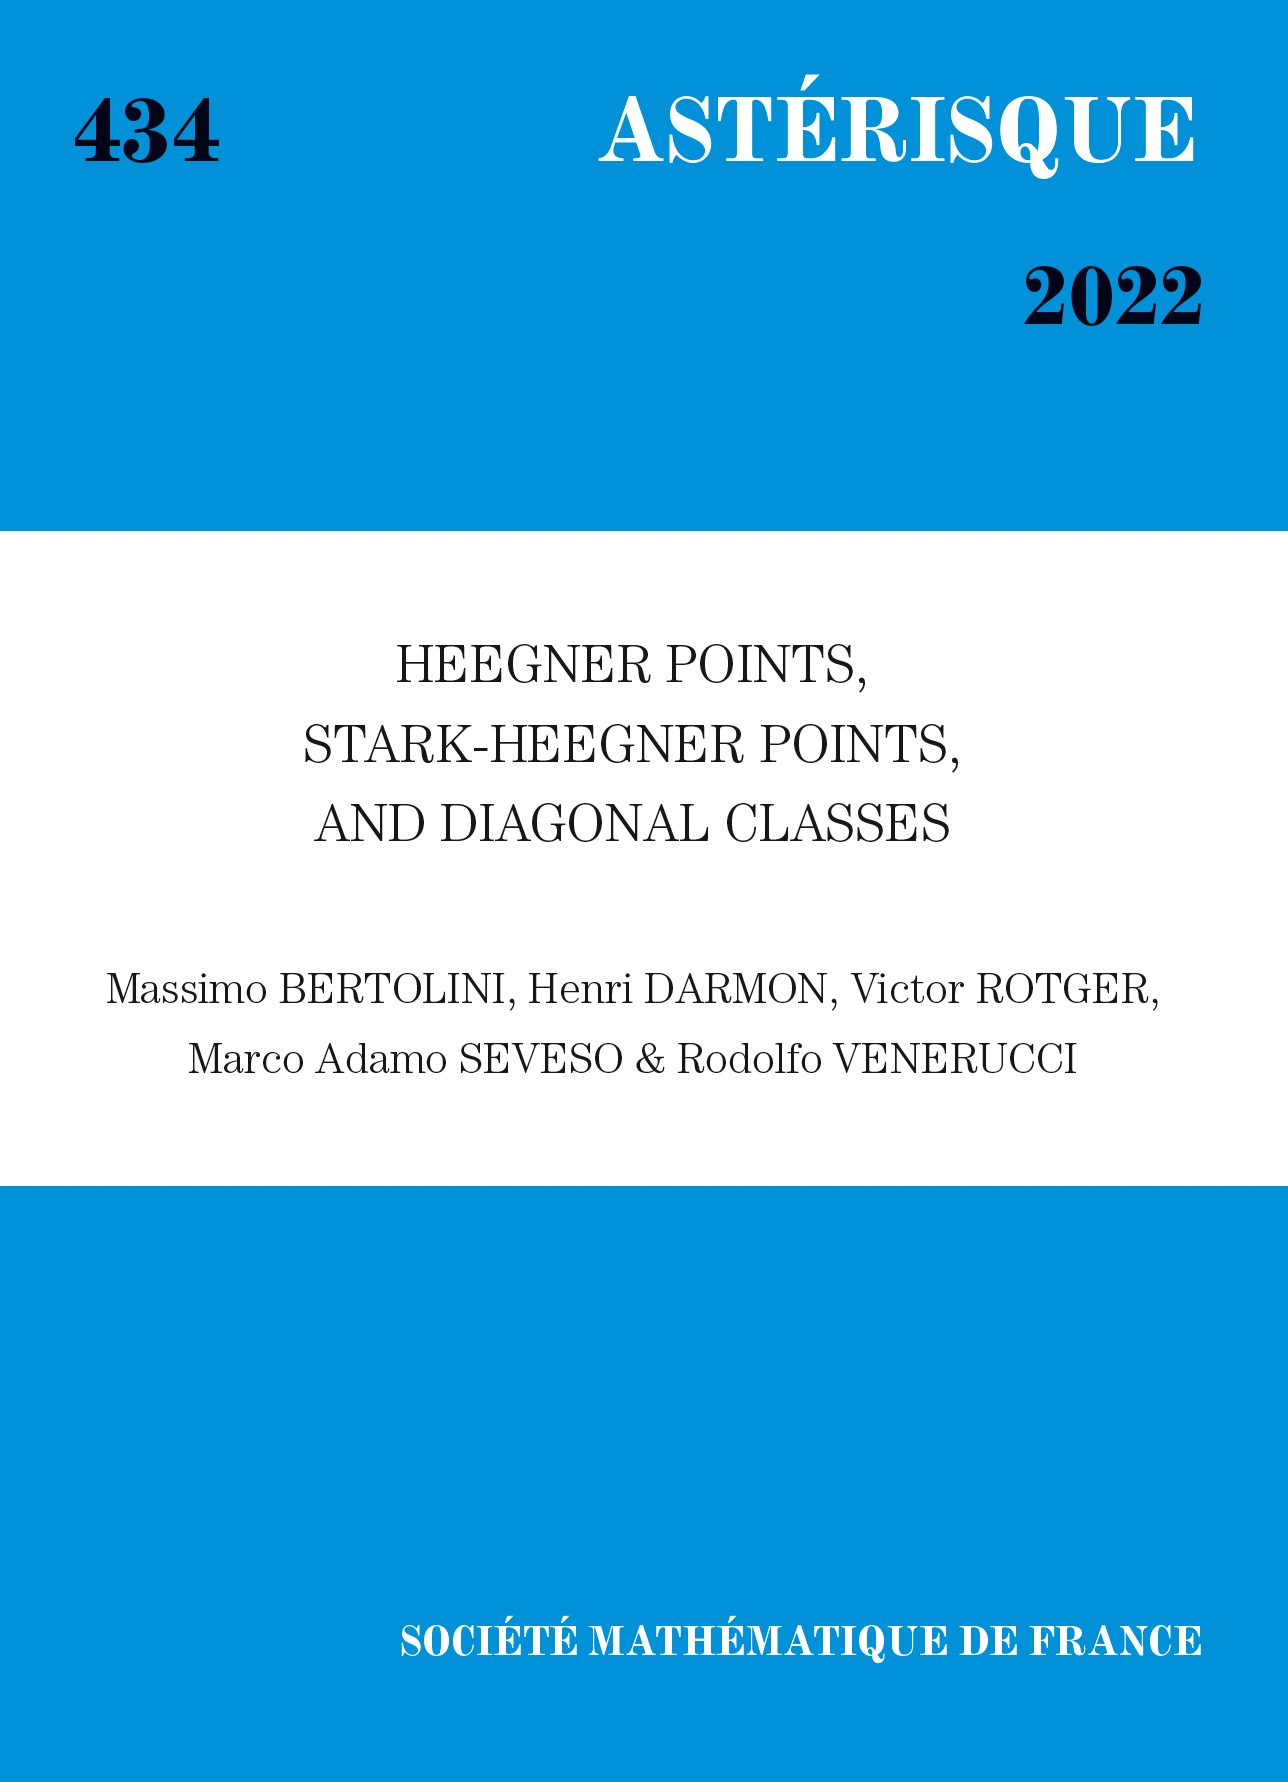 Heegner points, stark-Heegner points, and diagonal classes